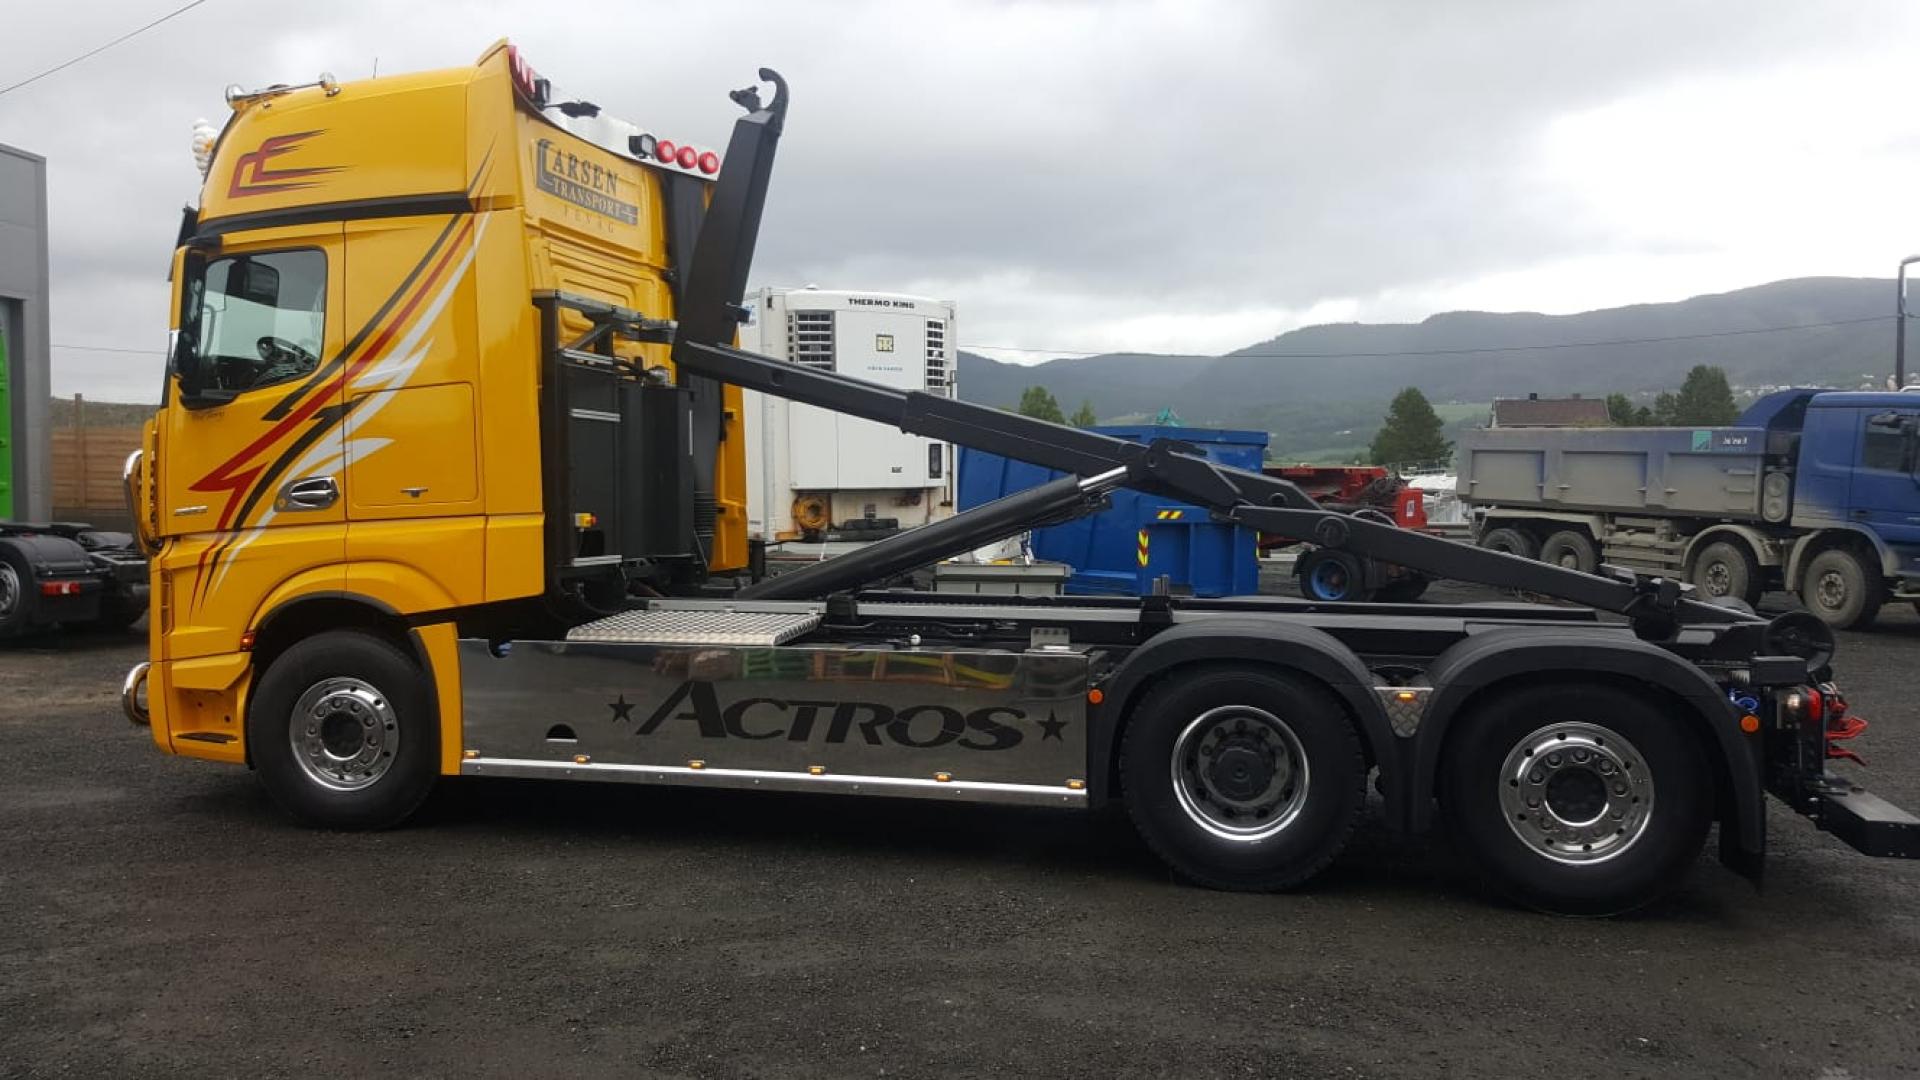 Mercedes with VDL containerhandlingsystem delivered in Norway